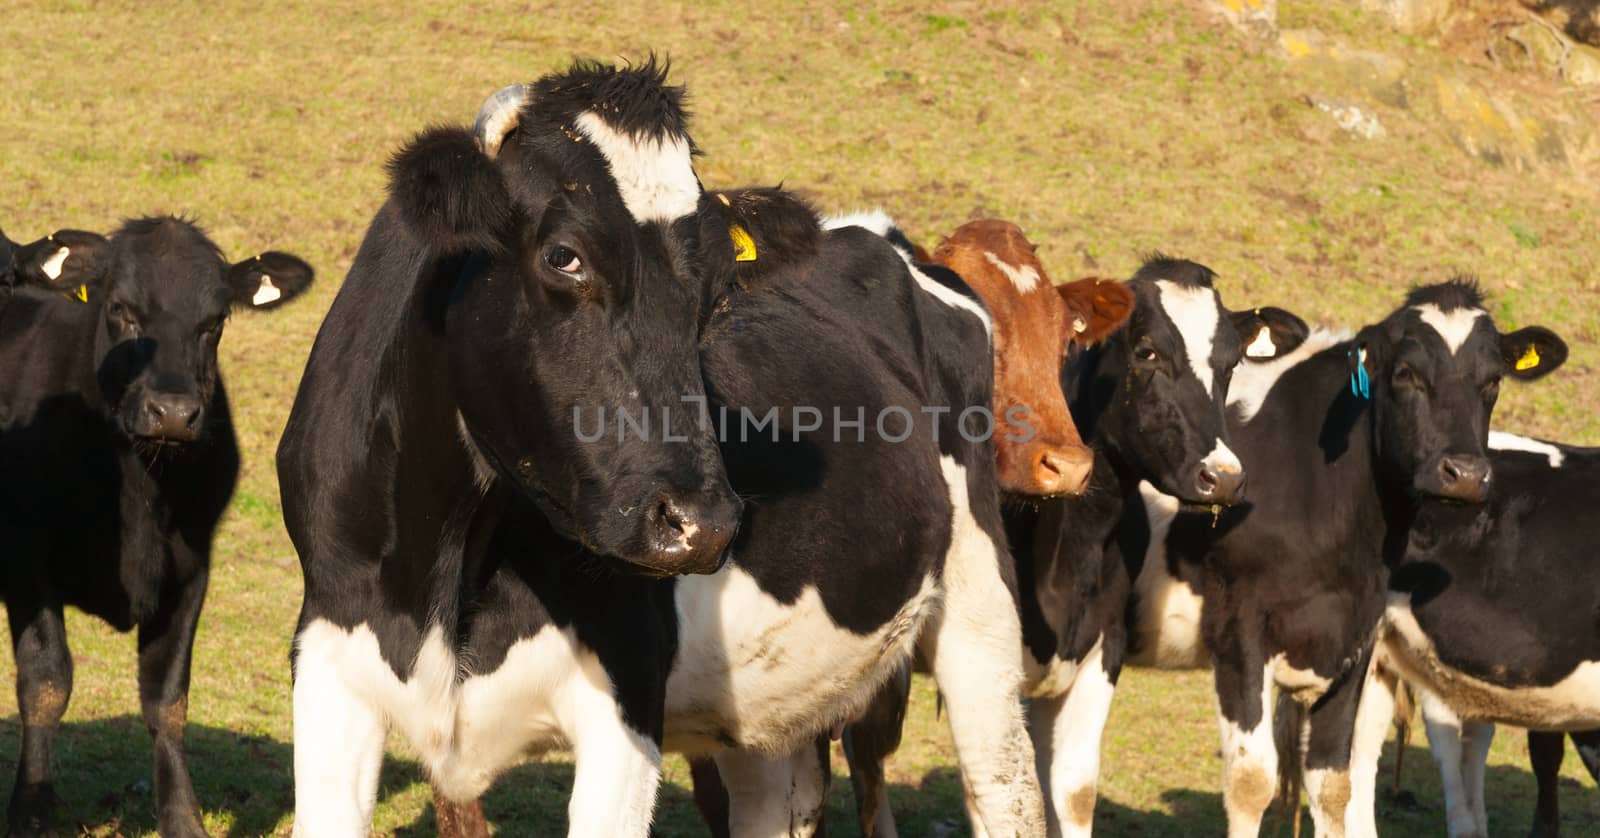 Freisian cattle being inquisitive.